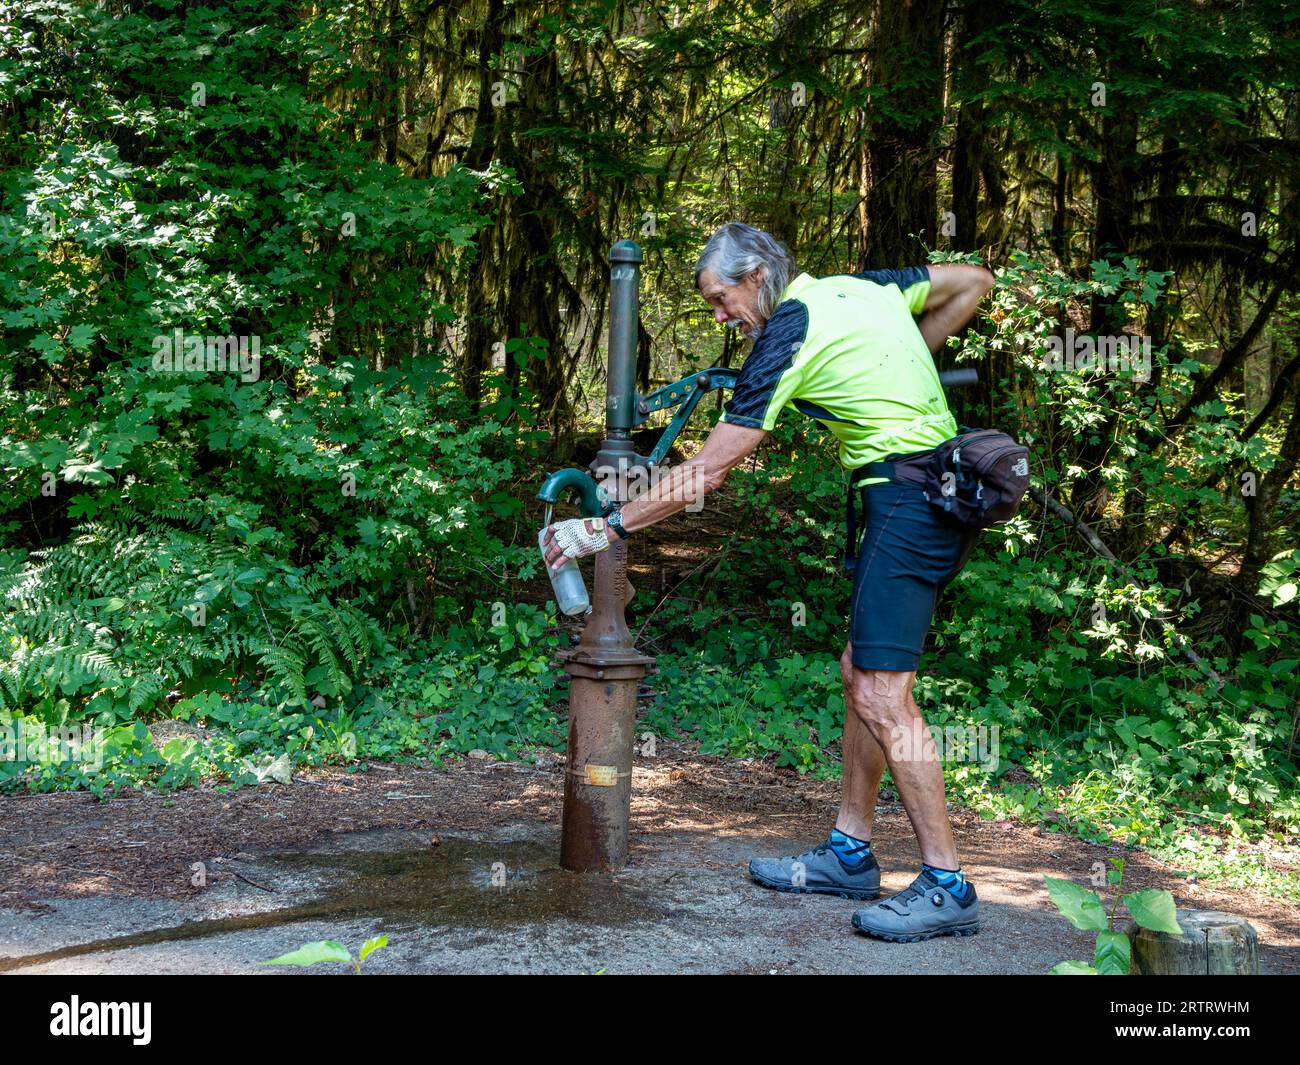 WA23688-00...WASHINGTON - Filling water bottle at historic Interrorem Cabin located along the Duckabush Road in the Olympic National Forest. Stock Photo